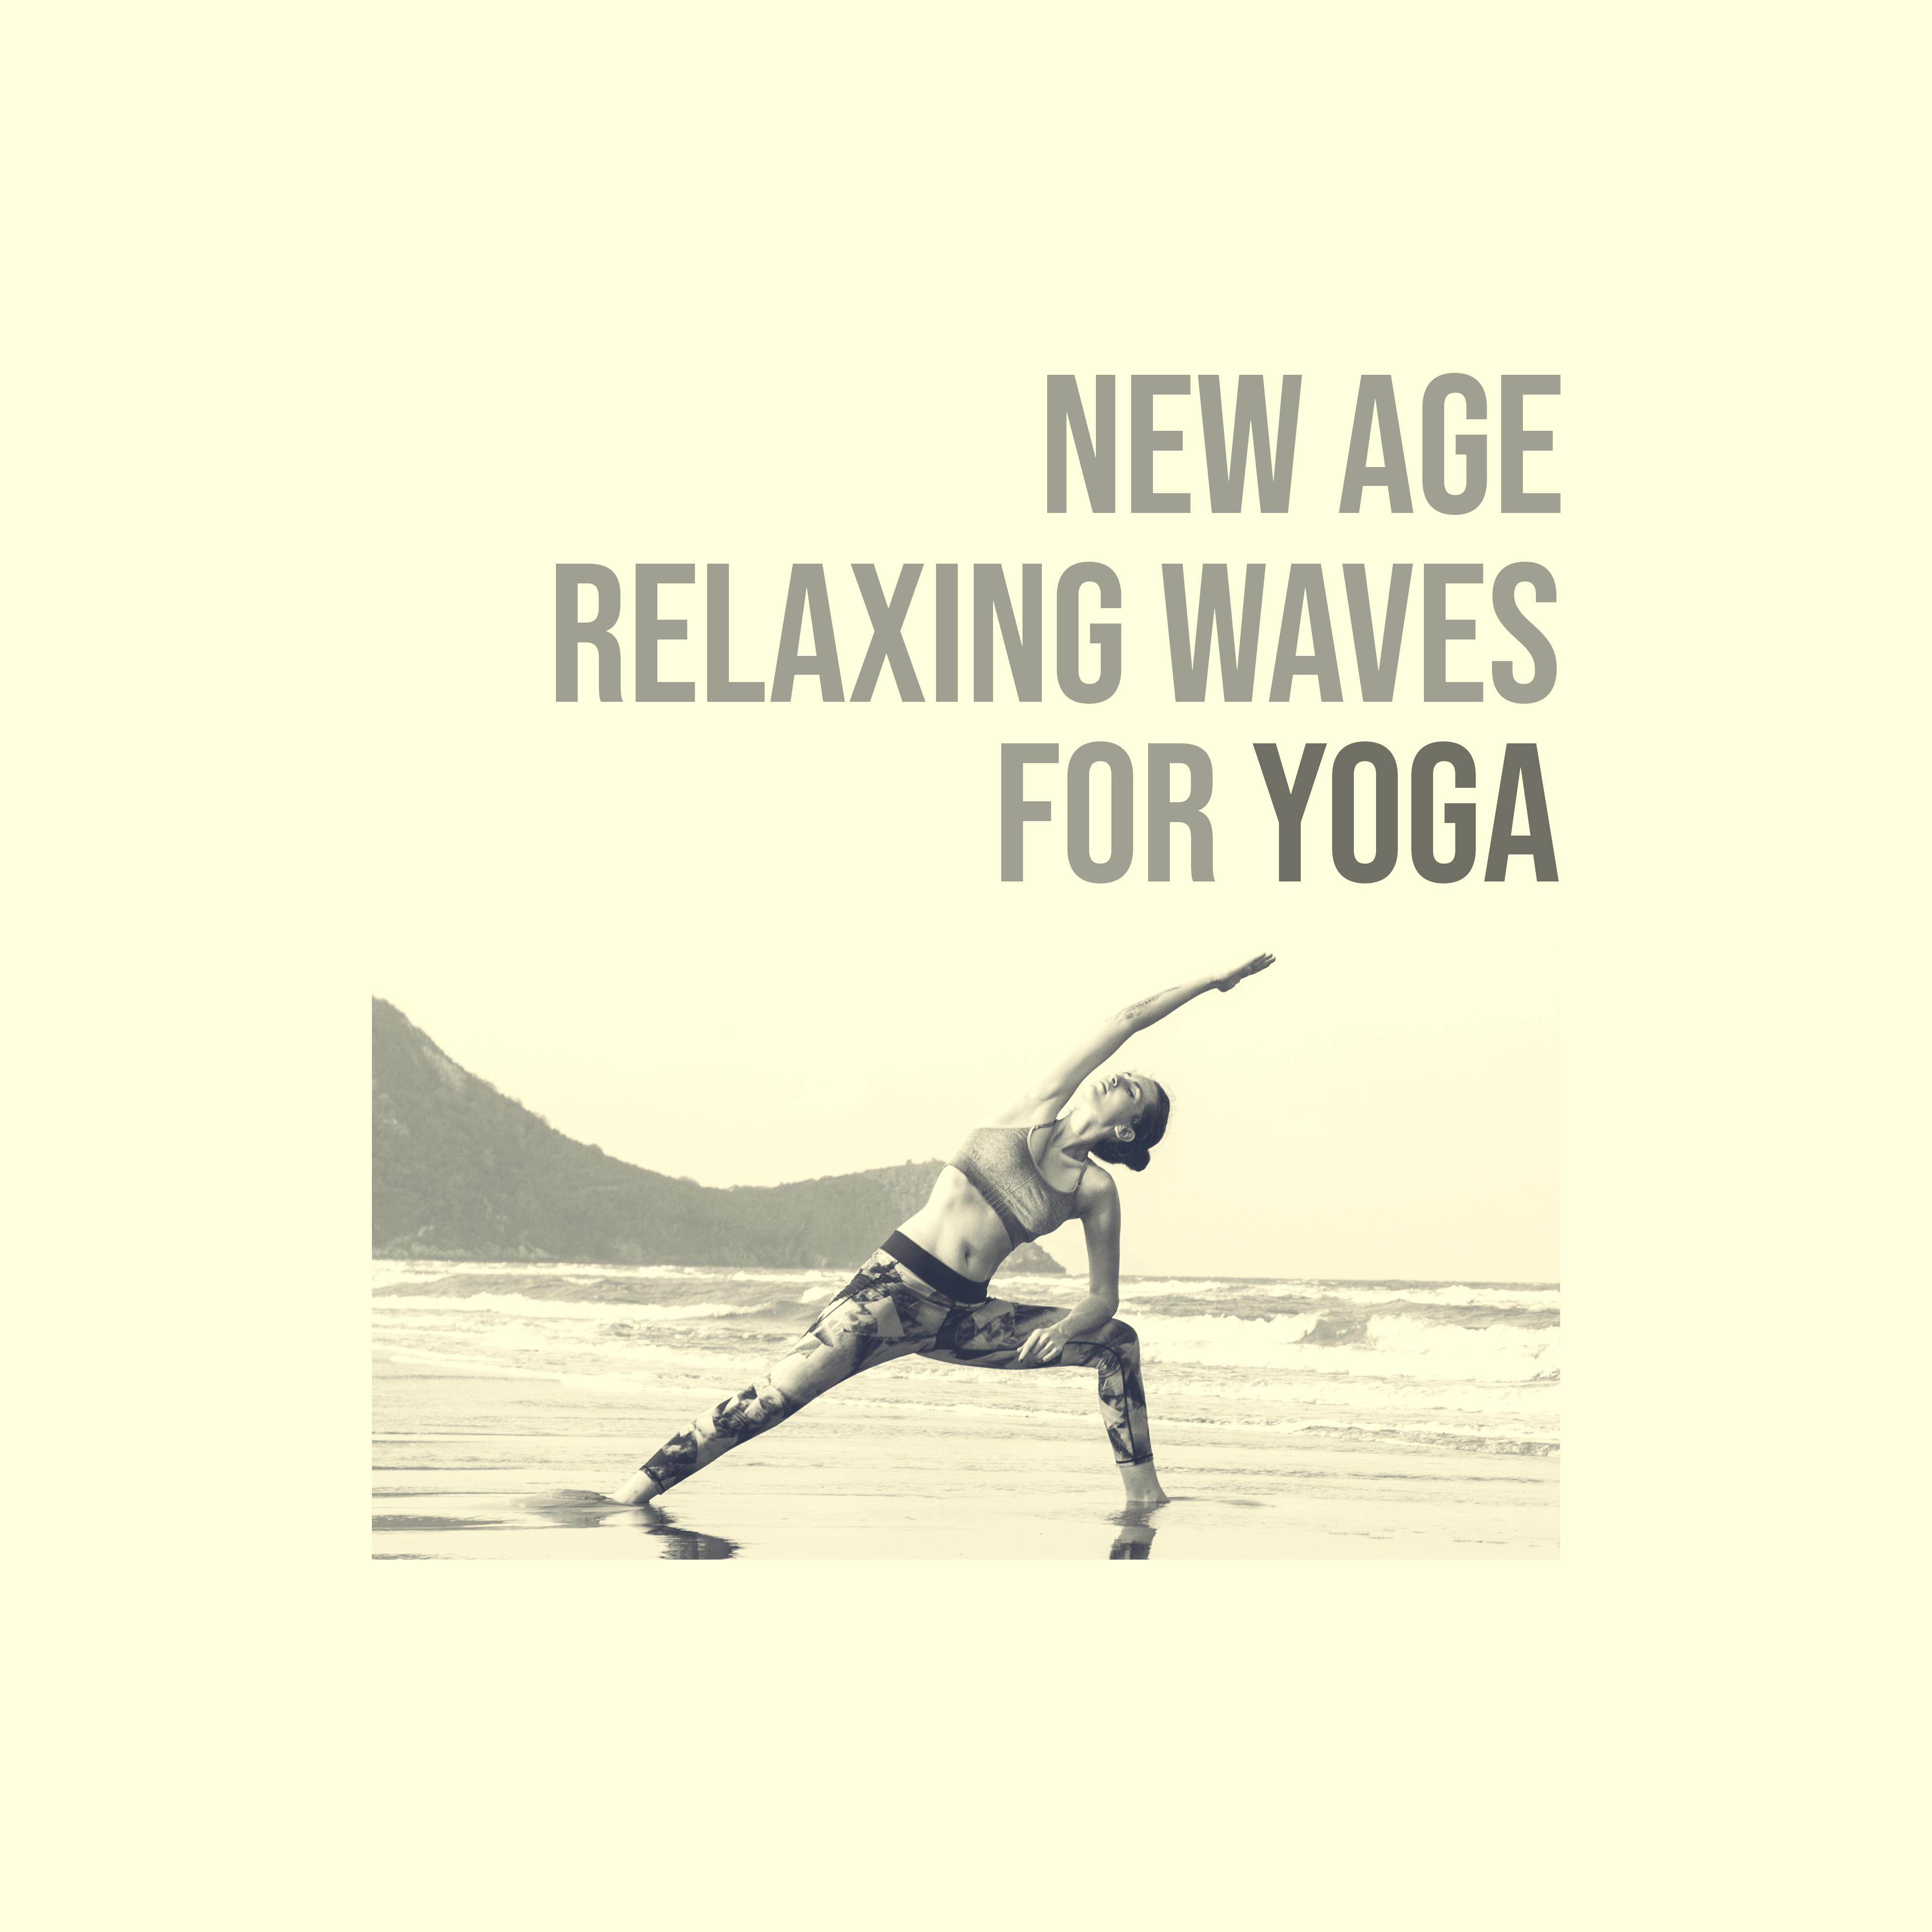 New Age Relaxing Waves for Yoga